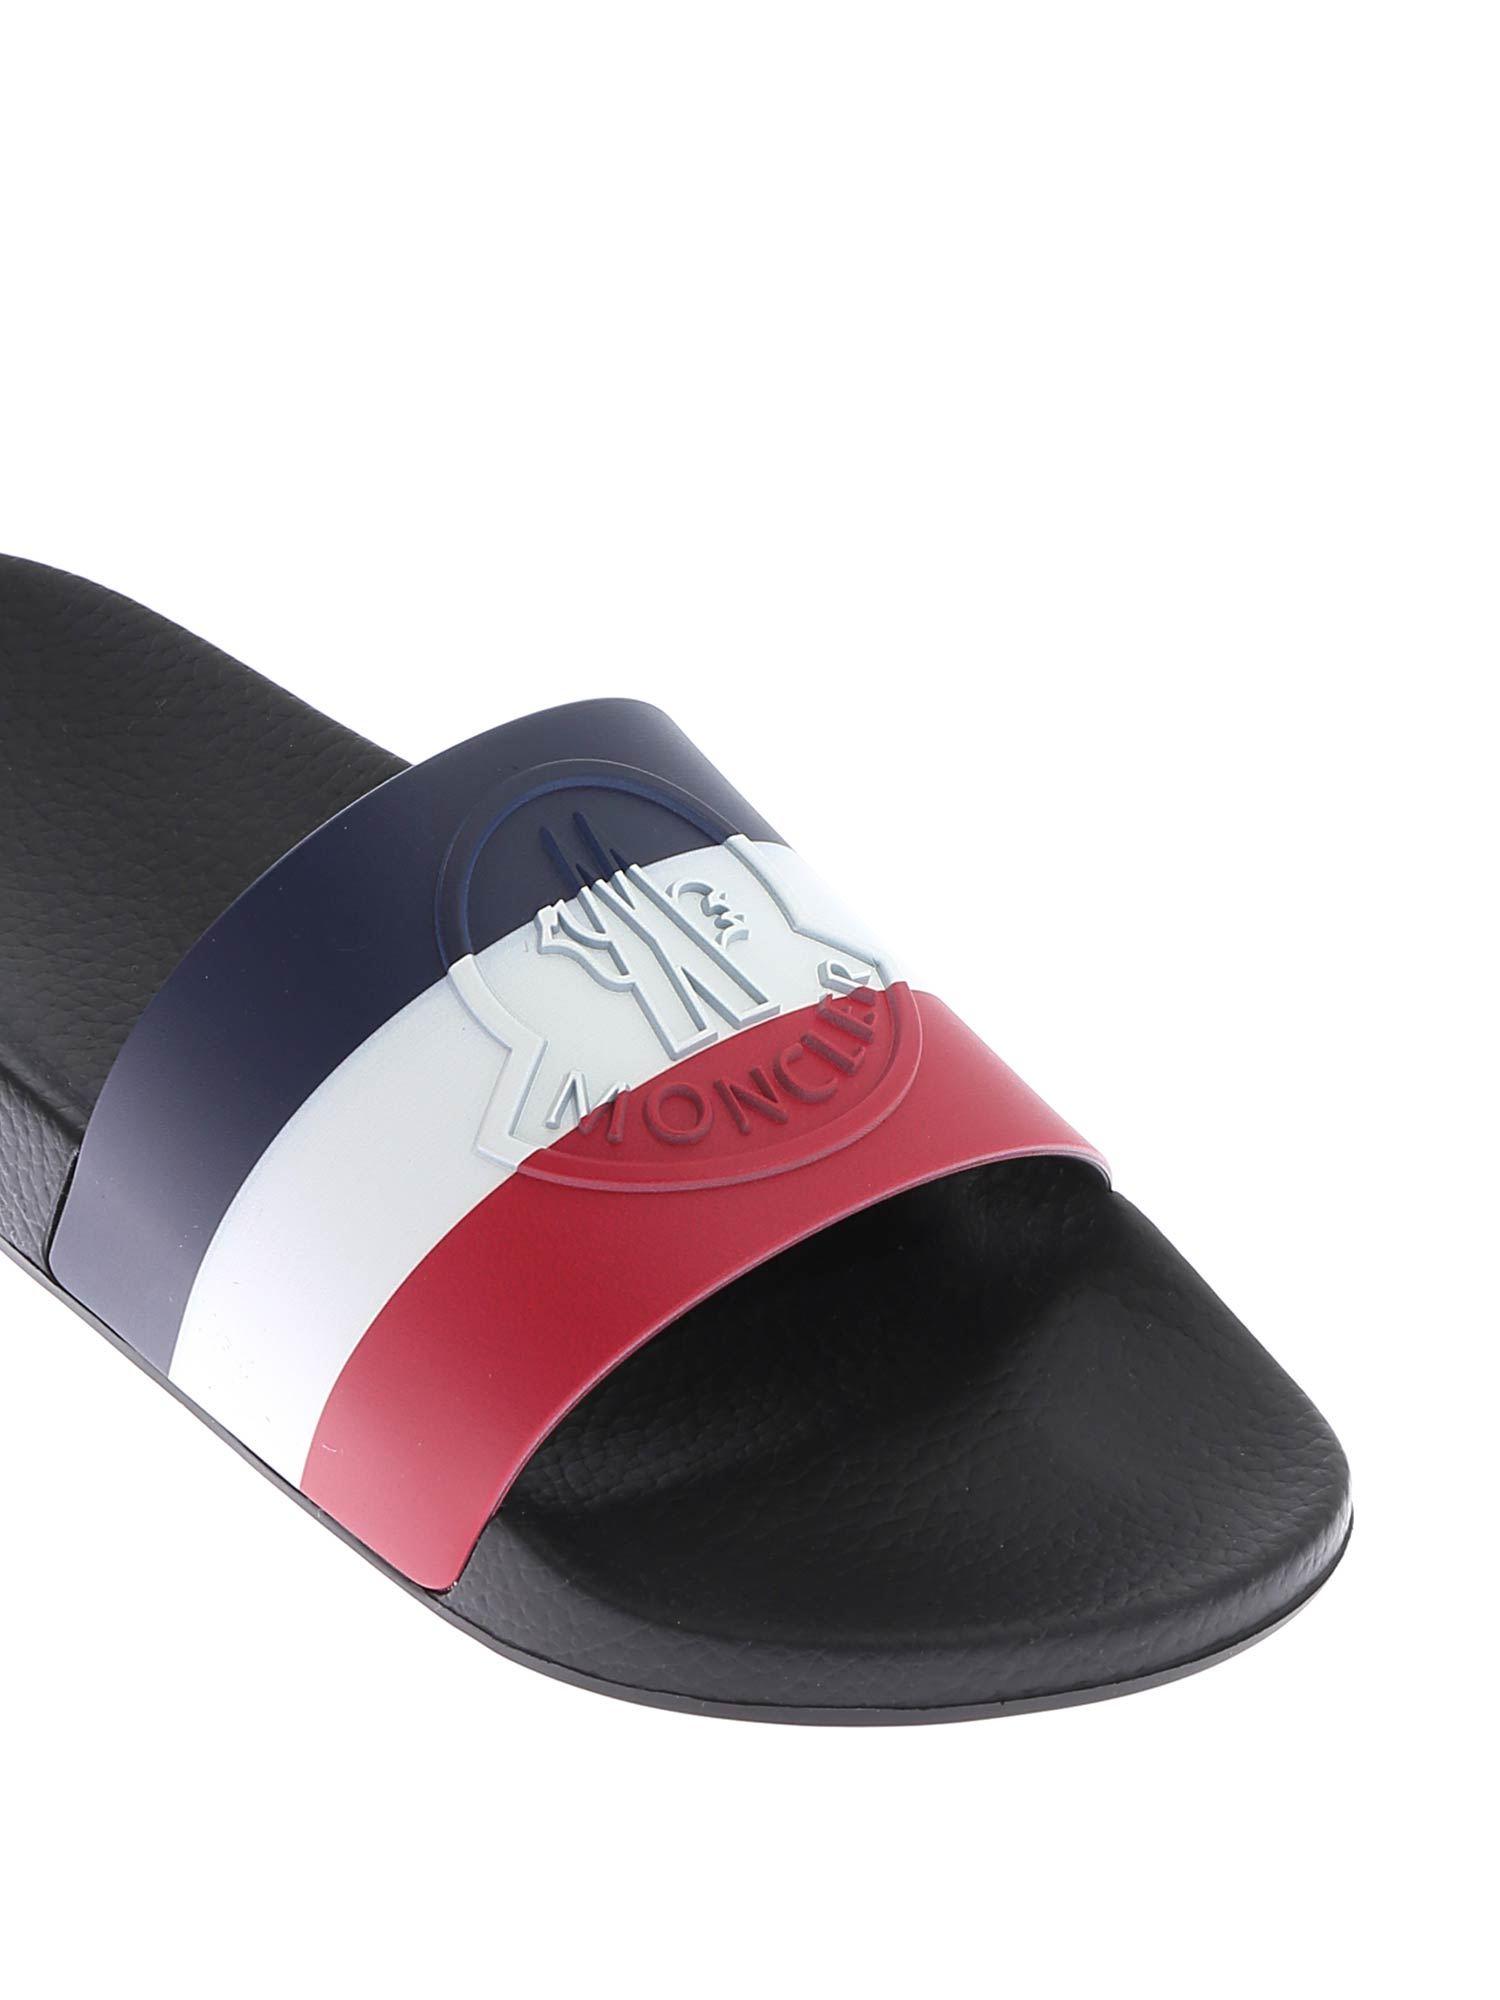 Moncler Basile Tricolor Slippers With Logo in Blue for Men - Lyst